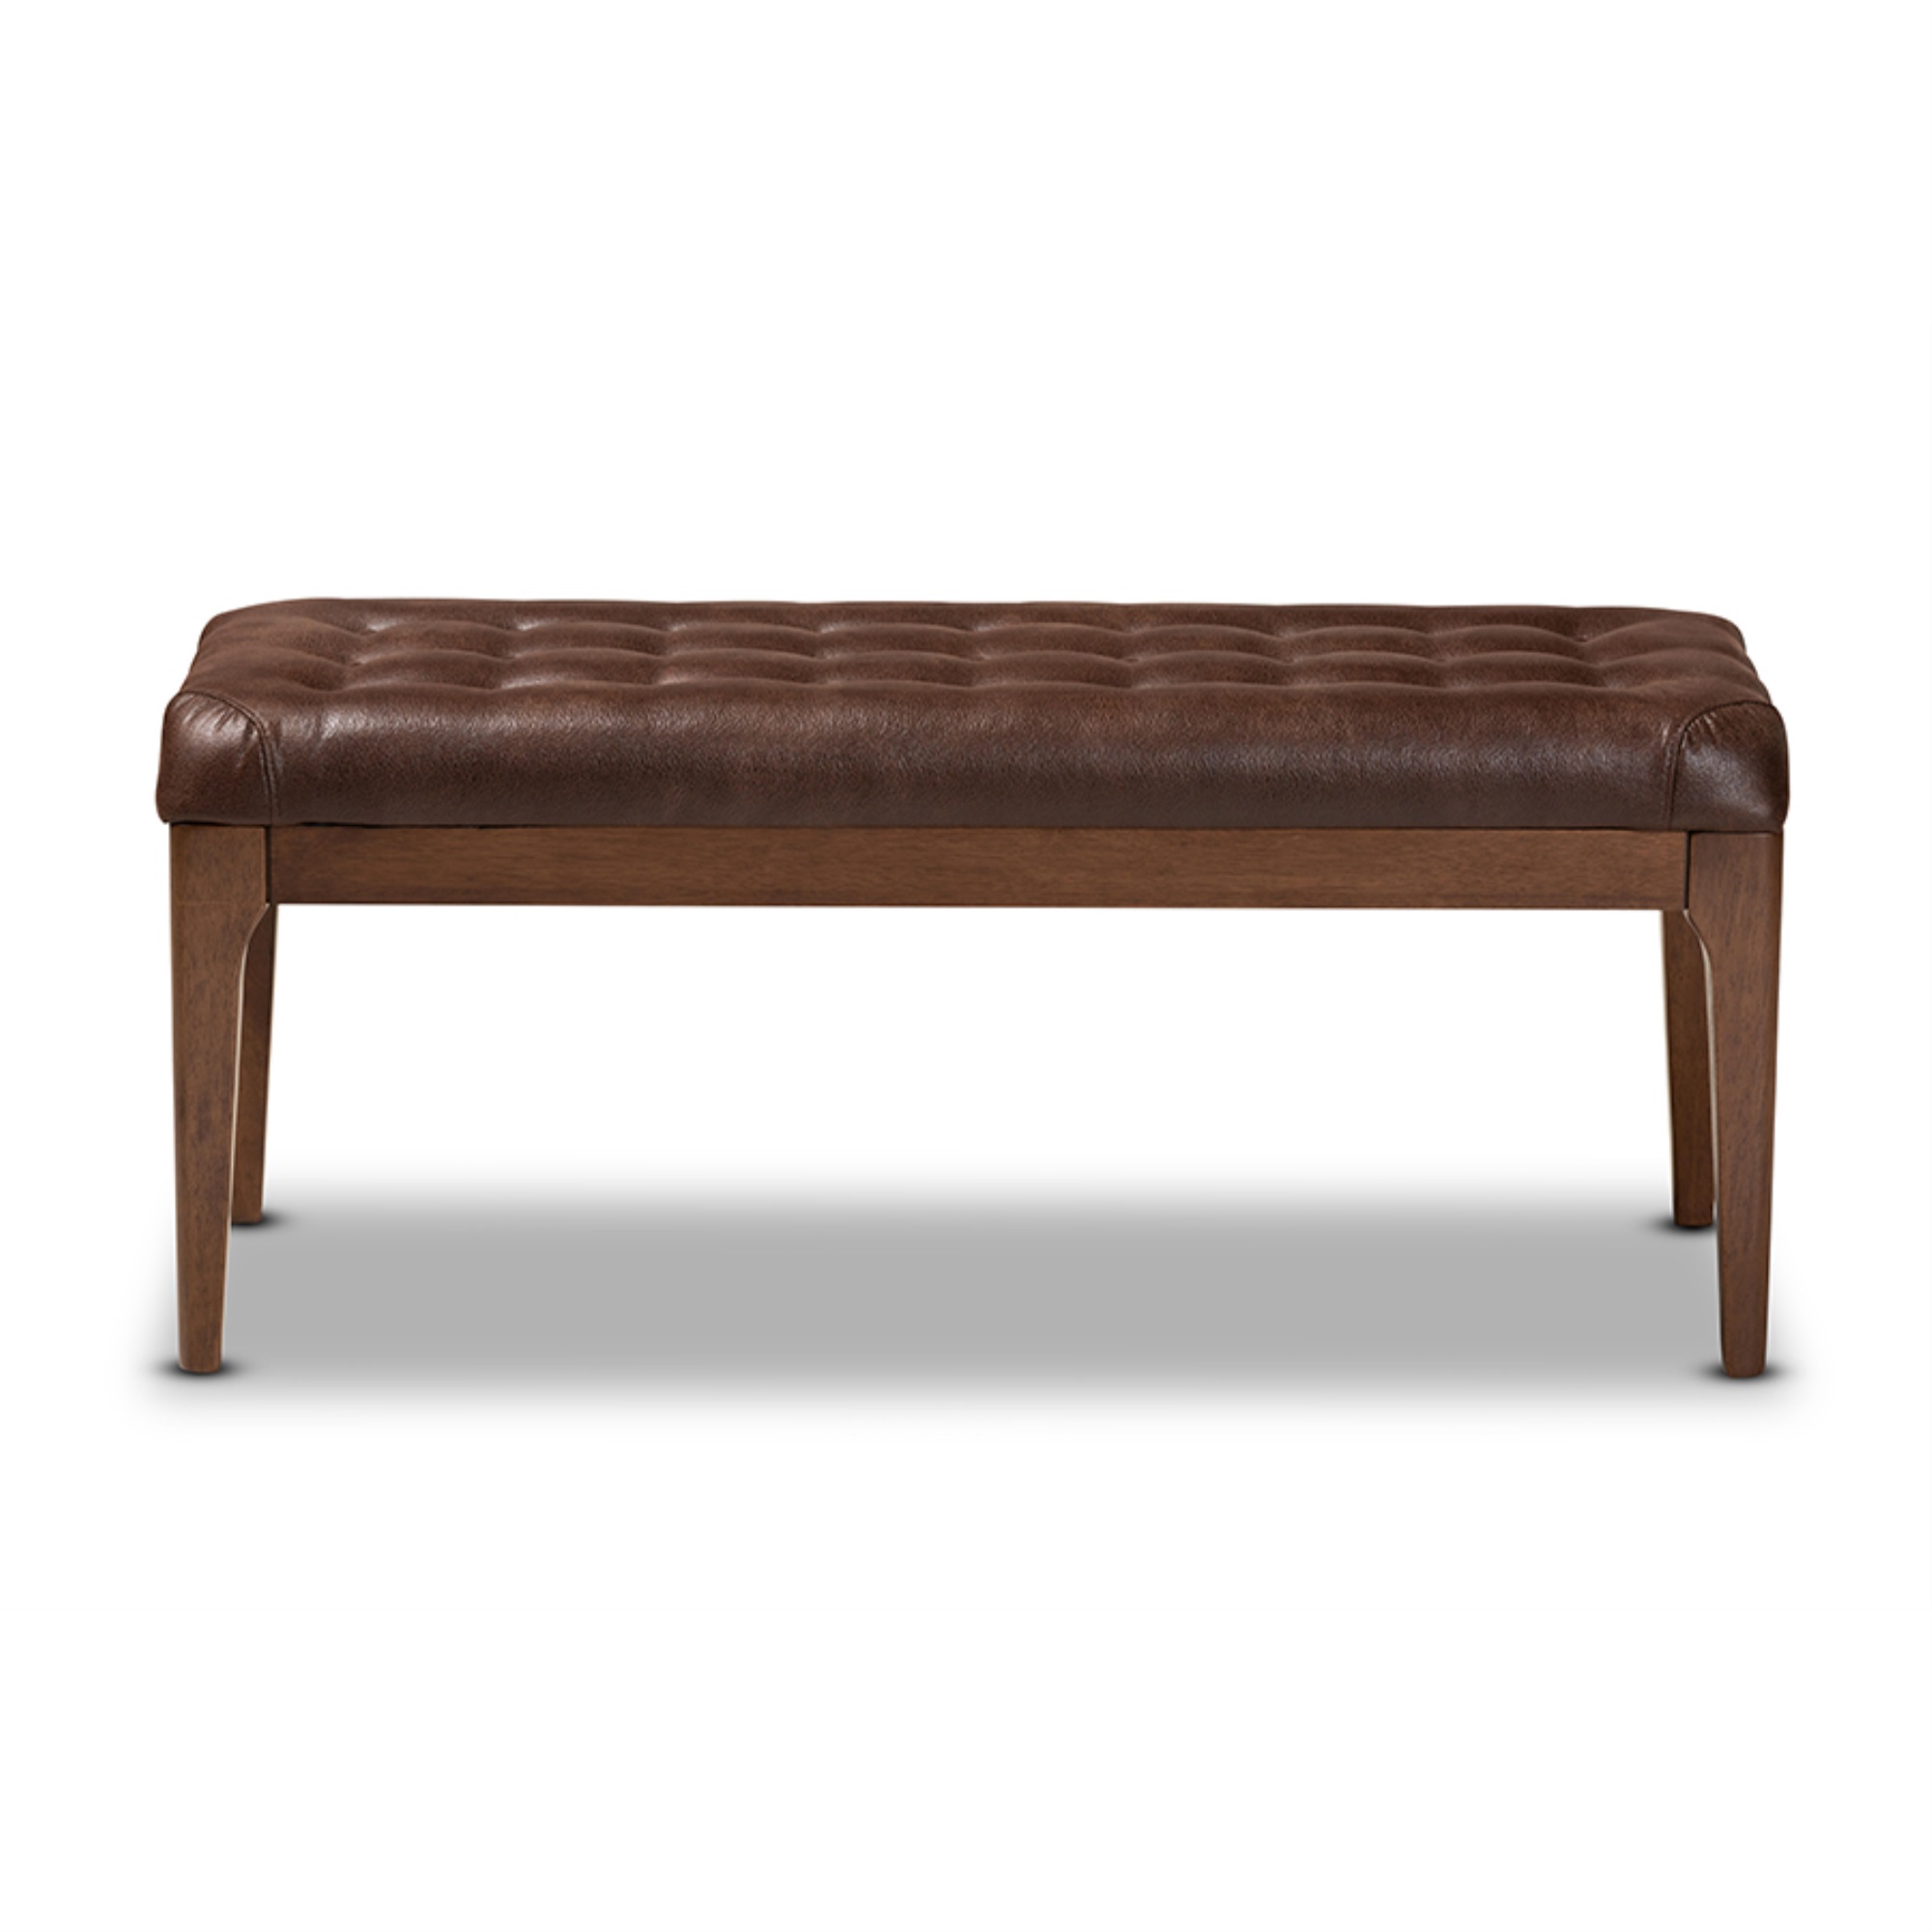 Wholesale Interiors Baxton Studio Walsh Mid-Century Modern Walnut Brown Finished Wood Dining Bench